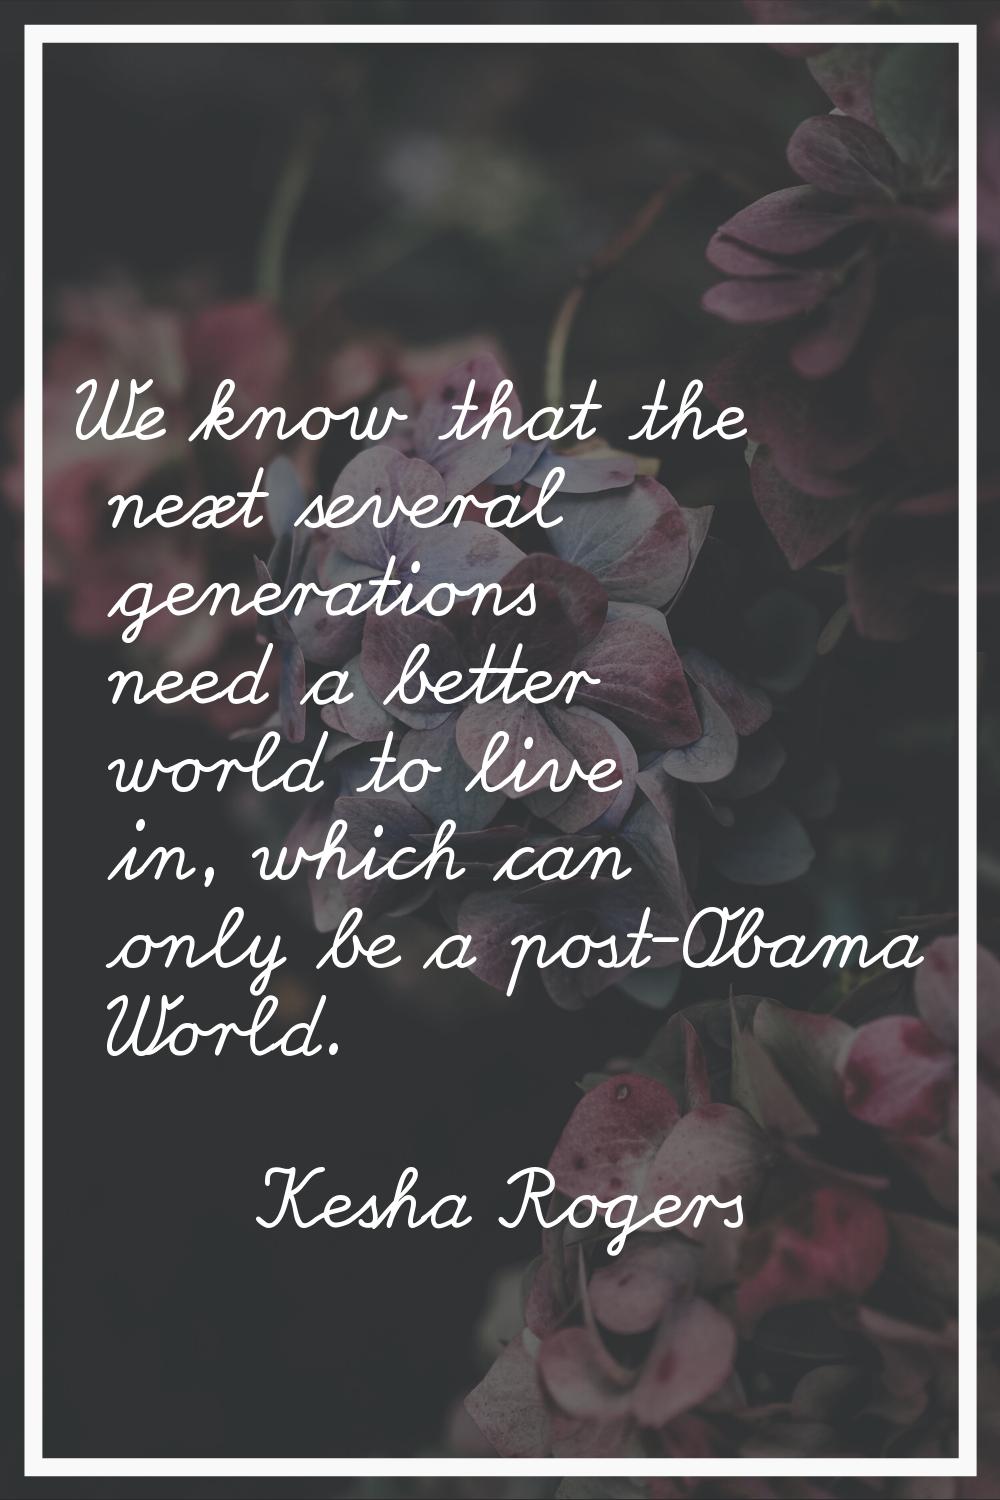 We know that the next several generations need a better world to live in, which can only be a post-